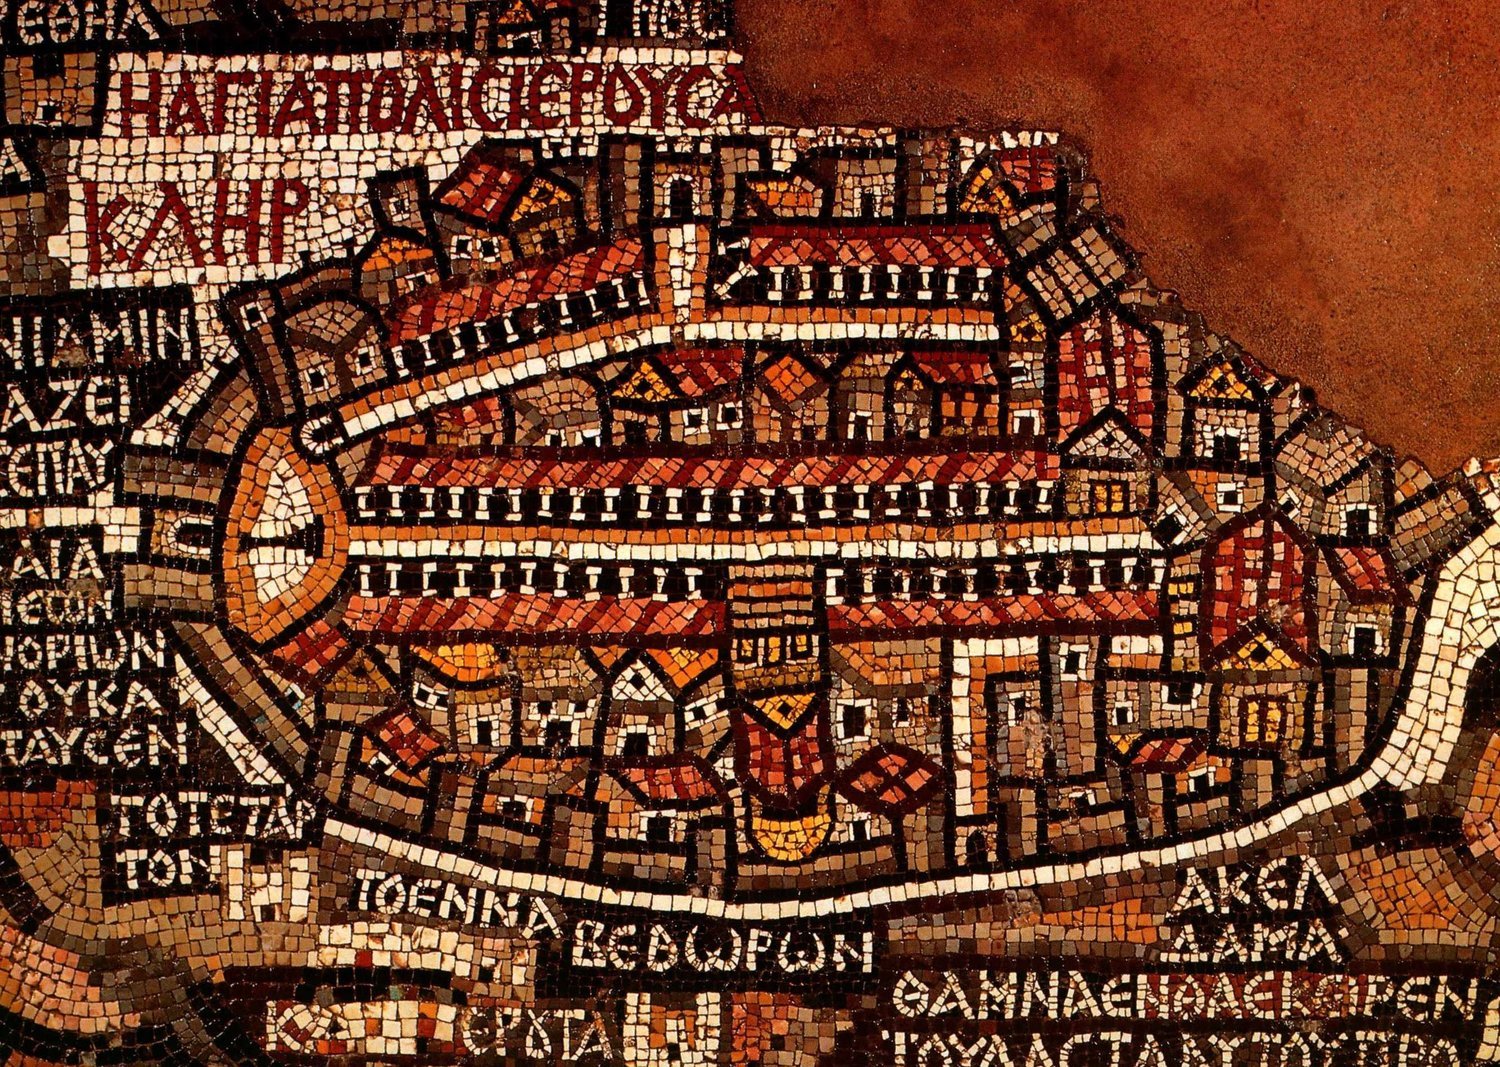 ((( Fragment that depicts Jerusalem. Walls are visible around the big cities, including Jerusalem, Jericho, and Ashdod. Jerusalem is the focus of the map. The Madaba Map Centenary, 1897-1997 